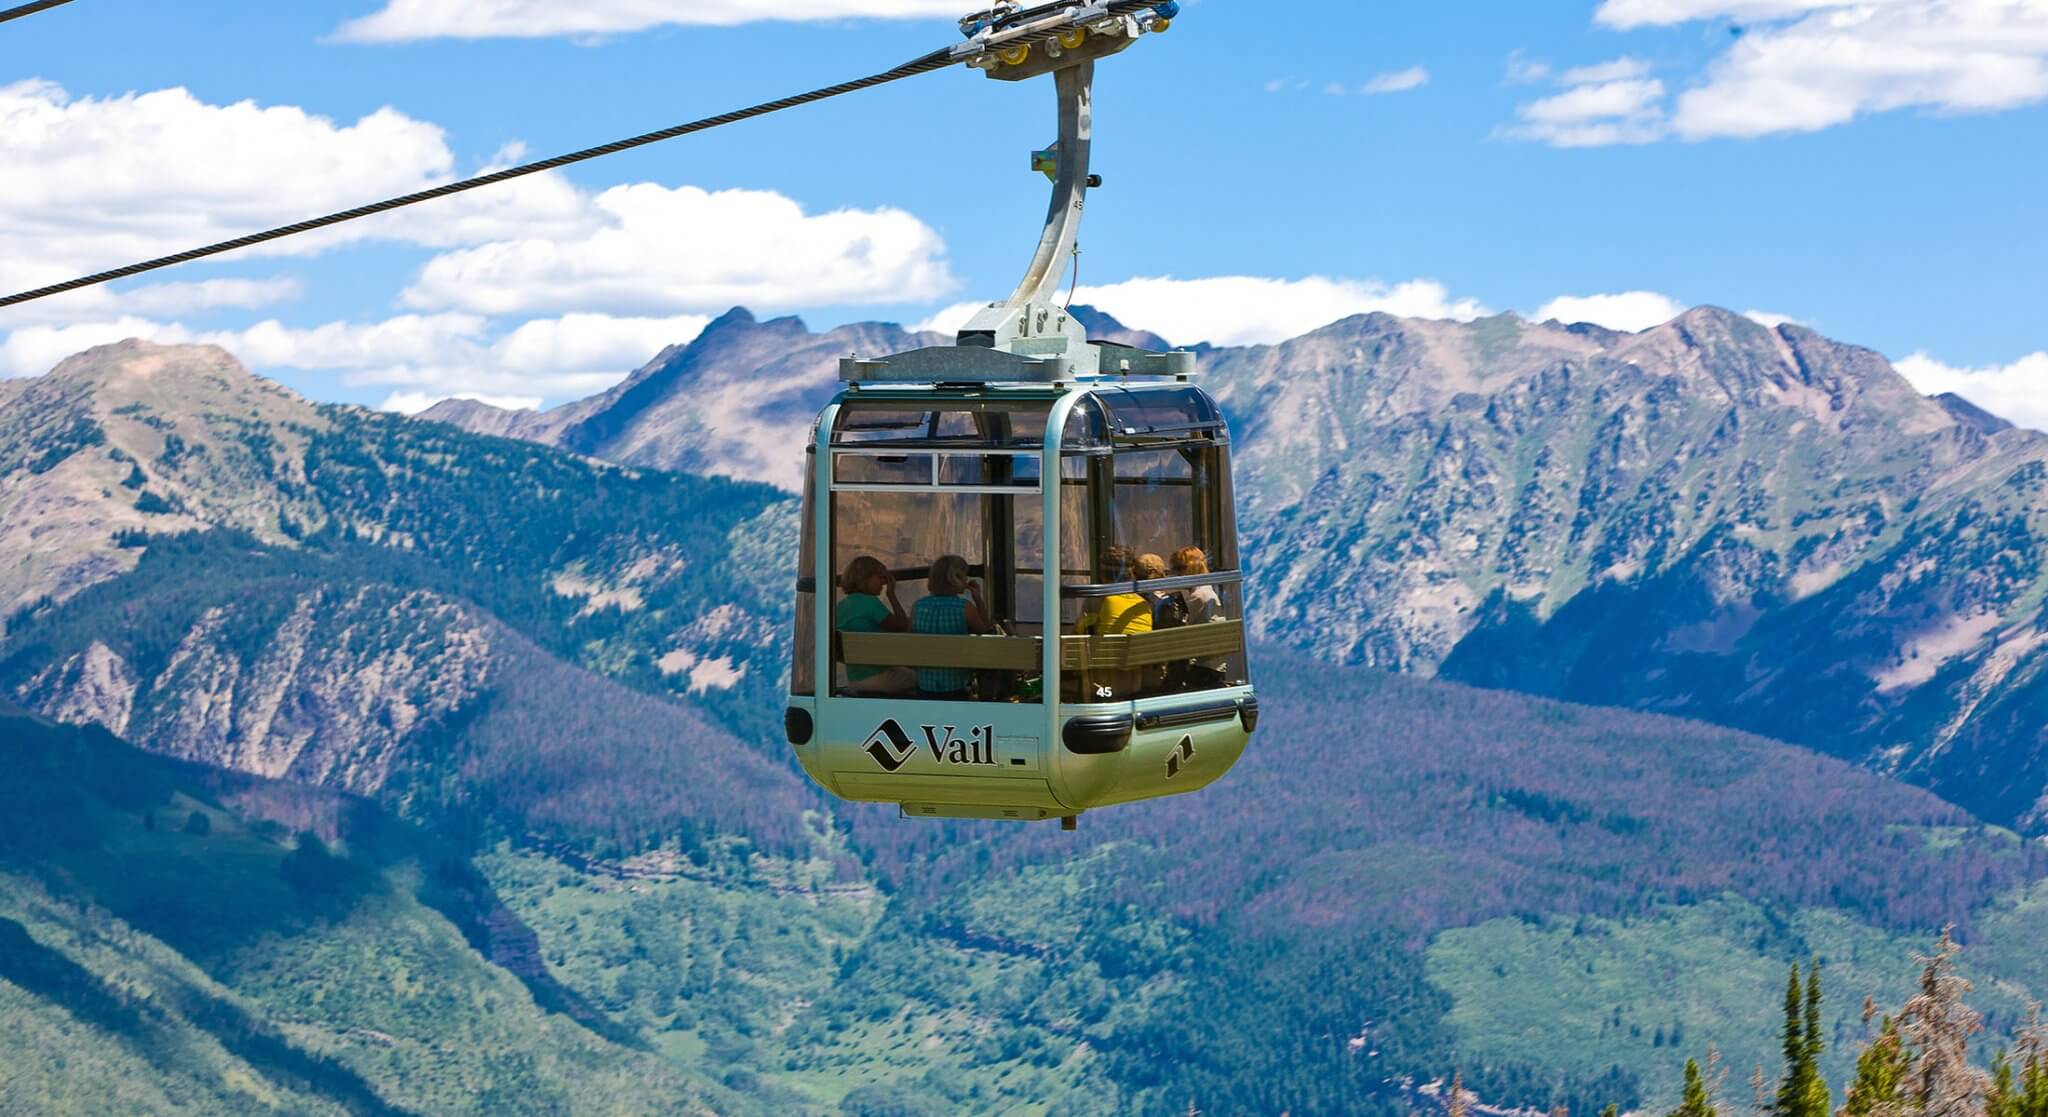 A silver gondola with a Vail logo carries people up the mountain on a cable, with lush, green mountains rising in the background under a blue sky.